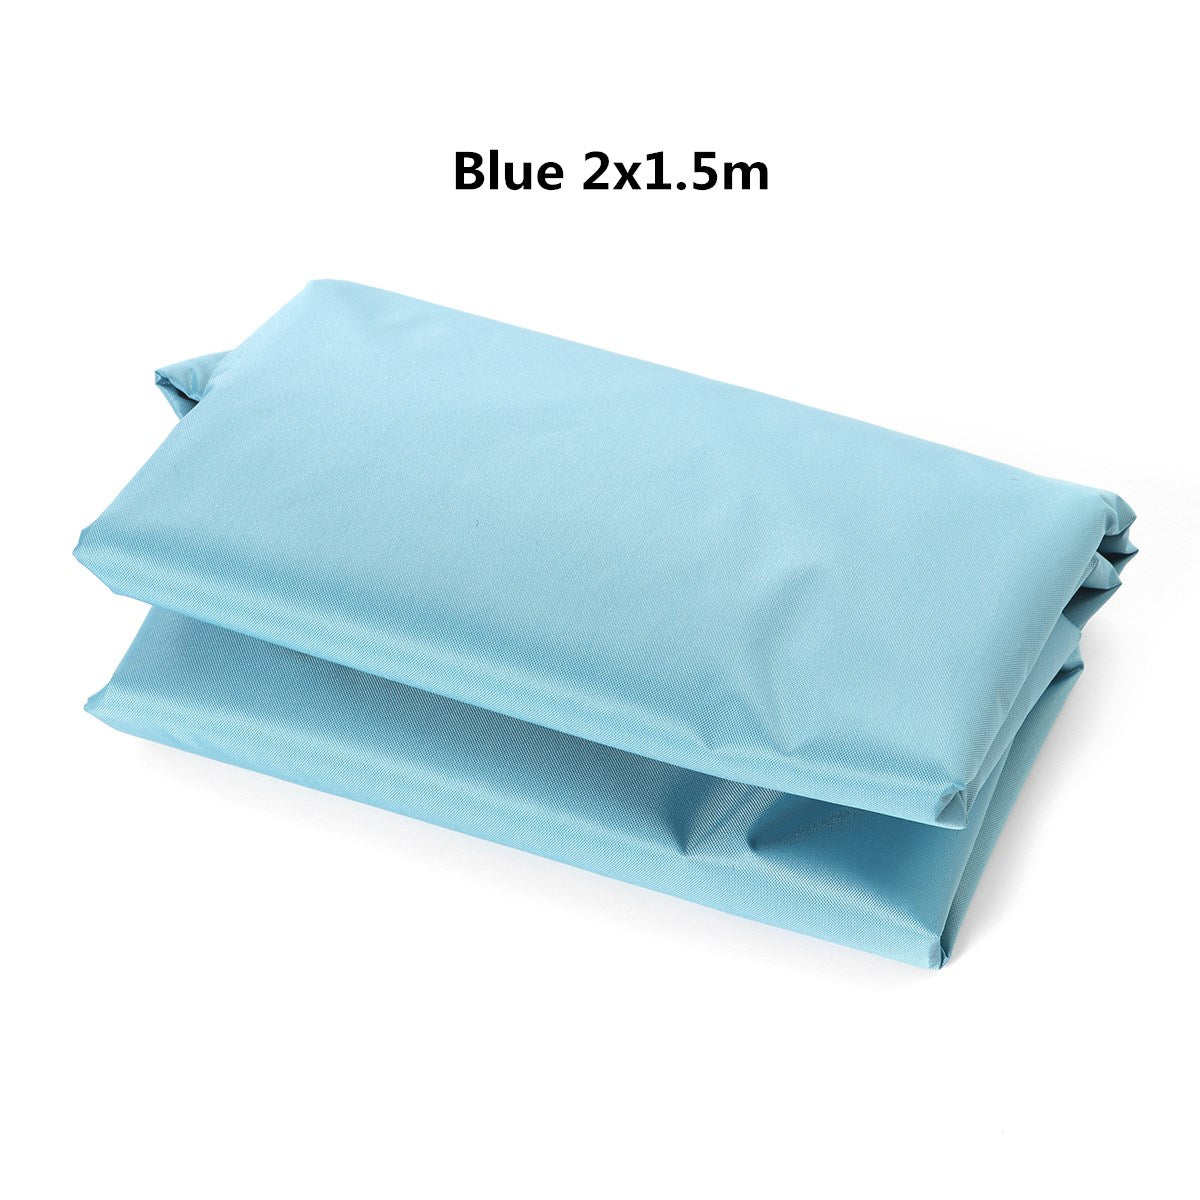 Light Blue Boat Outdoor Garden Patio Awning Cover Canopy Sun Shade Shelter Waterproof